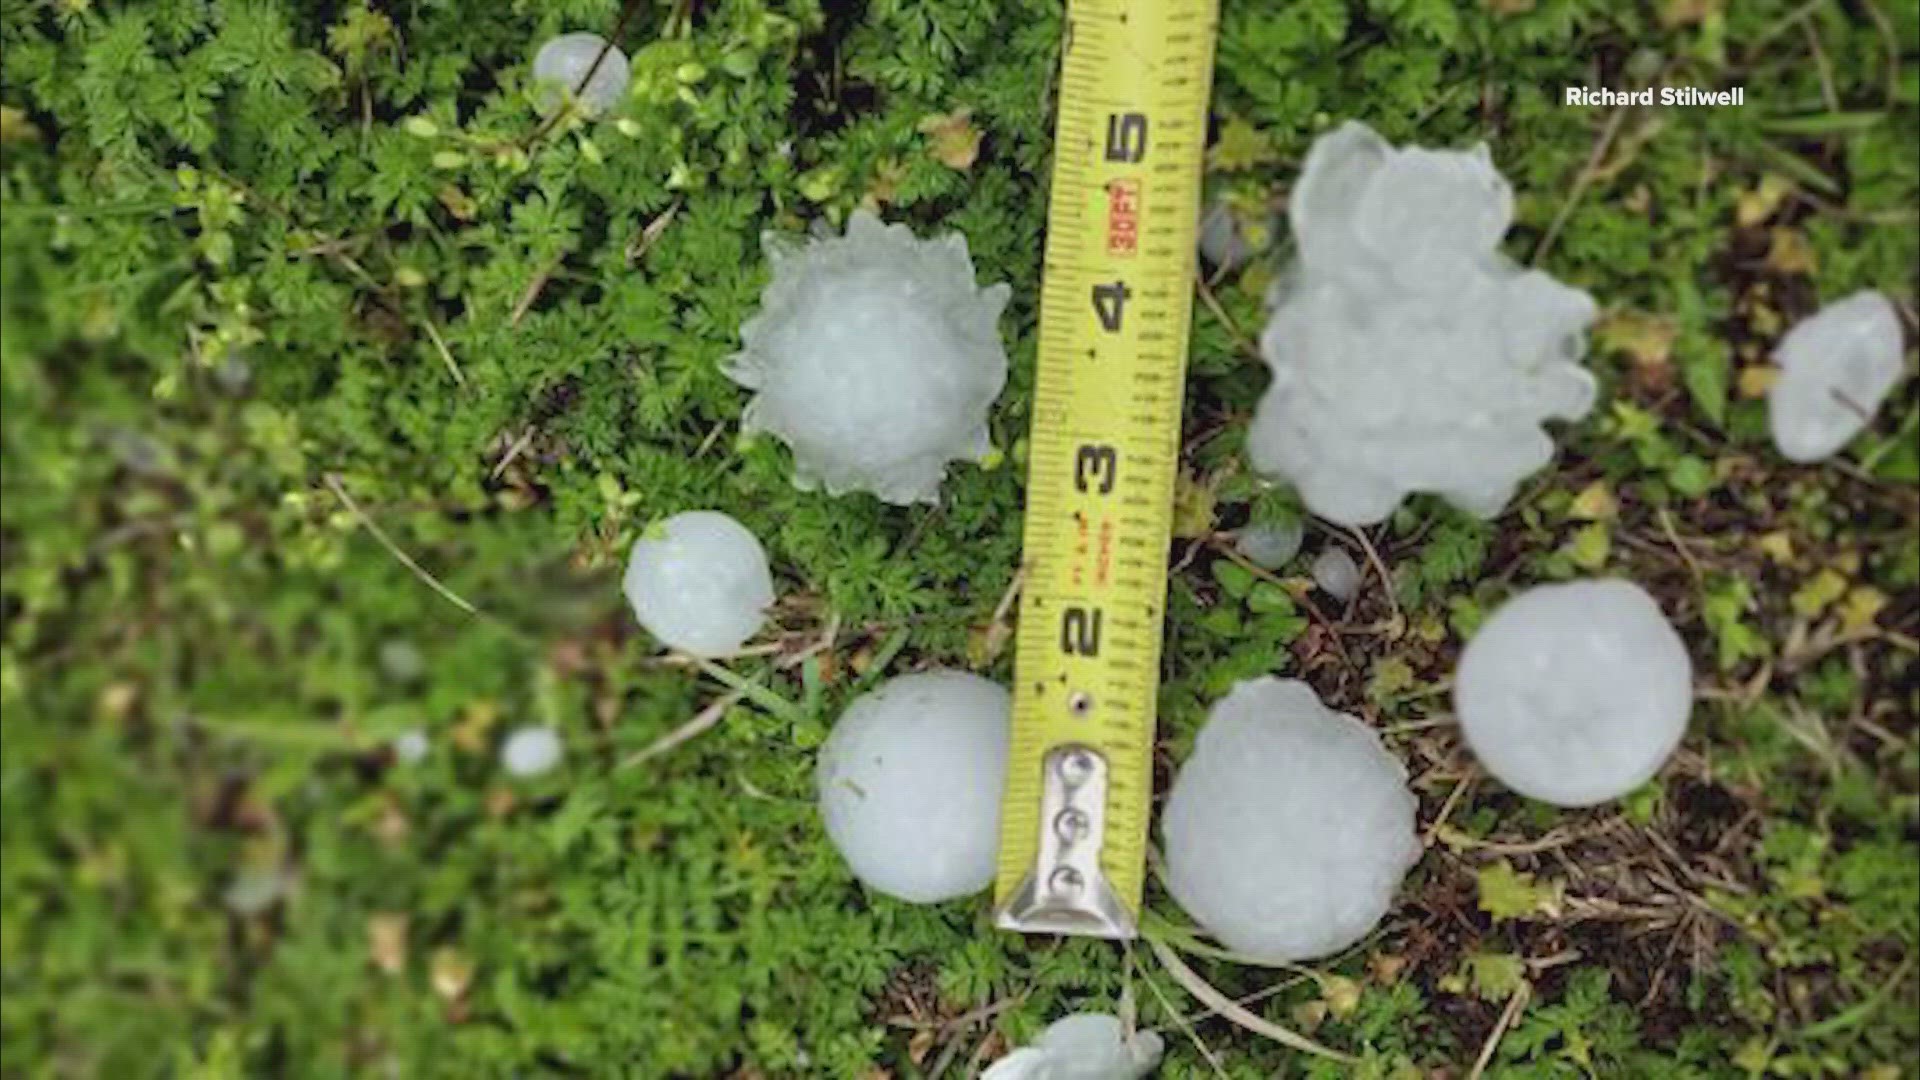 The hail left damage across the region in its wake.